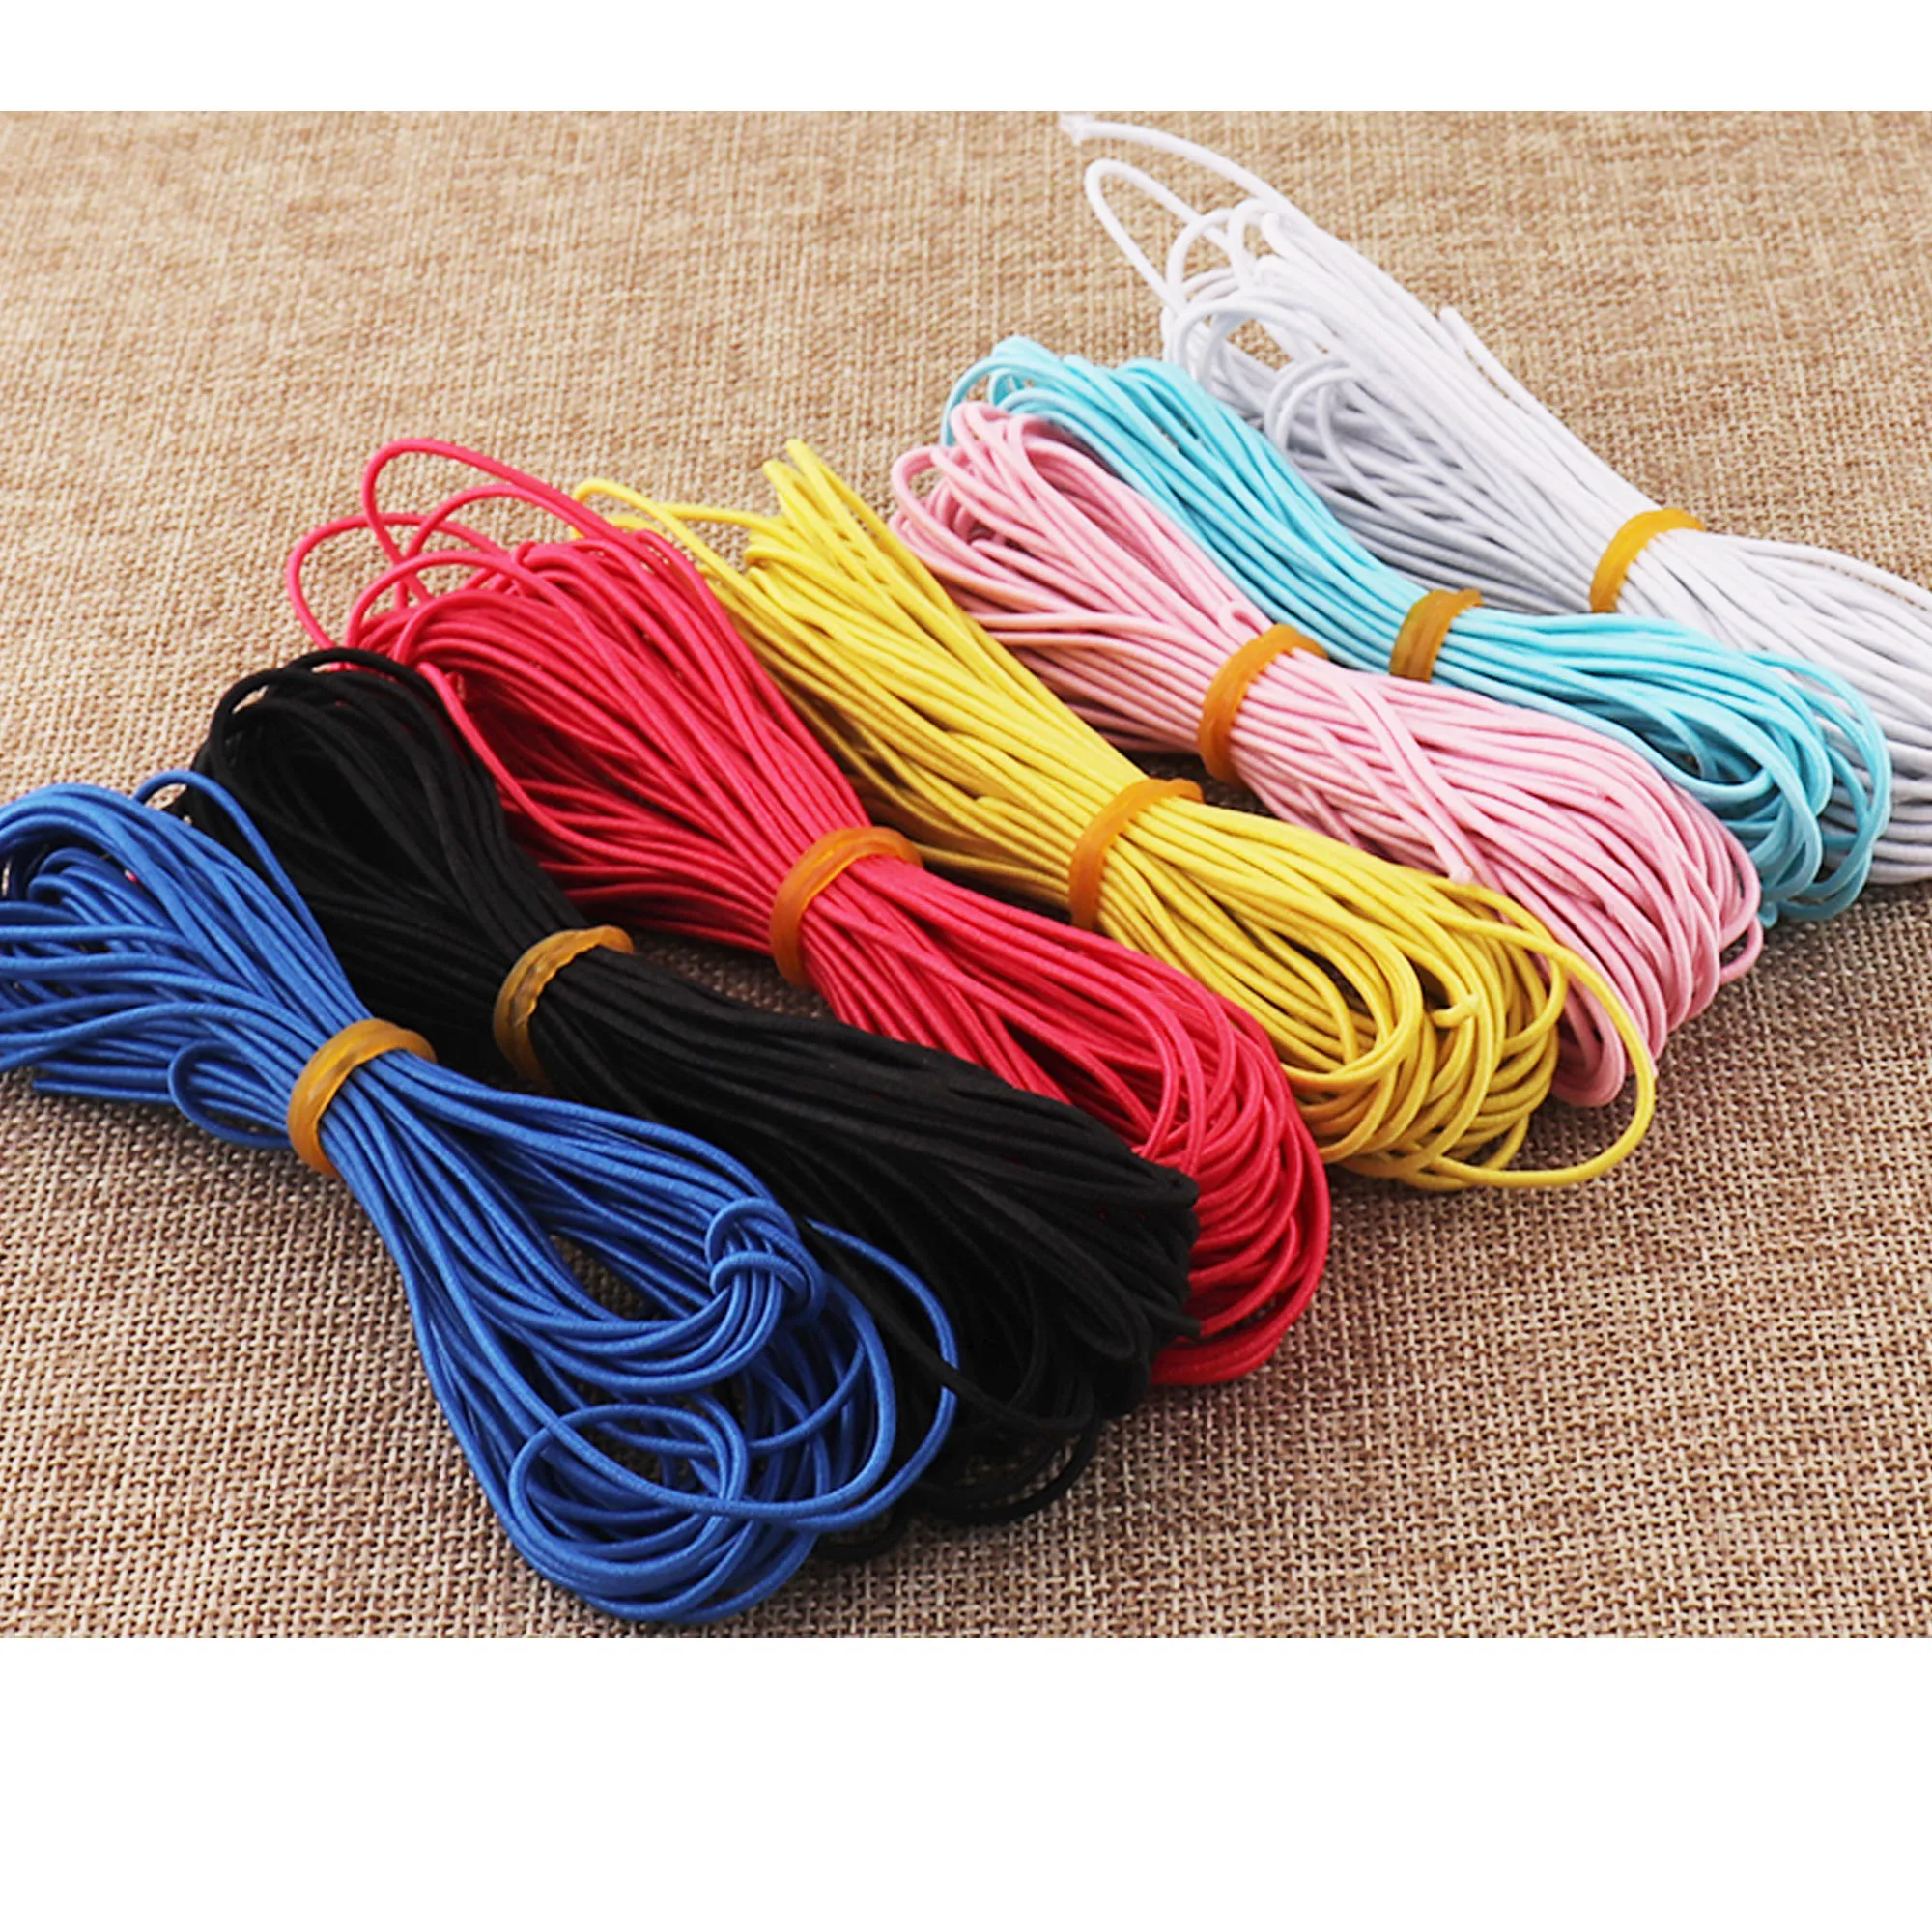 100 Yards White Yards Elastic Band 1/4 inch Elastic Cord Rope Sewing Crafts  DIY Mask Bedspread Cuff for Craft Mask Making - AliExpress